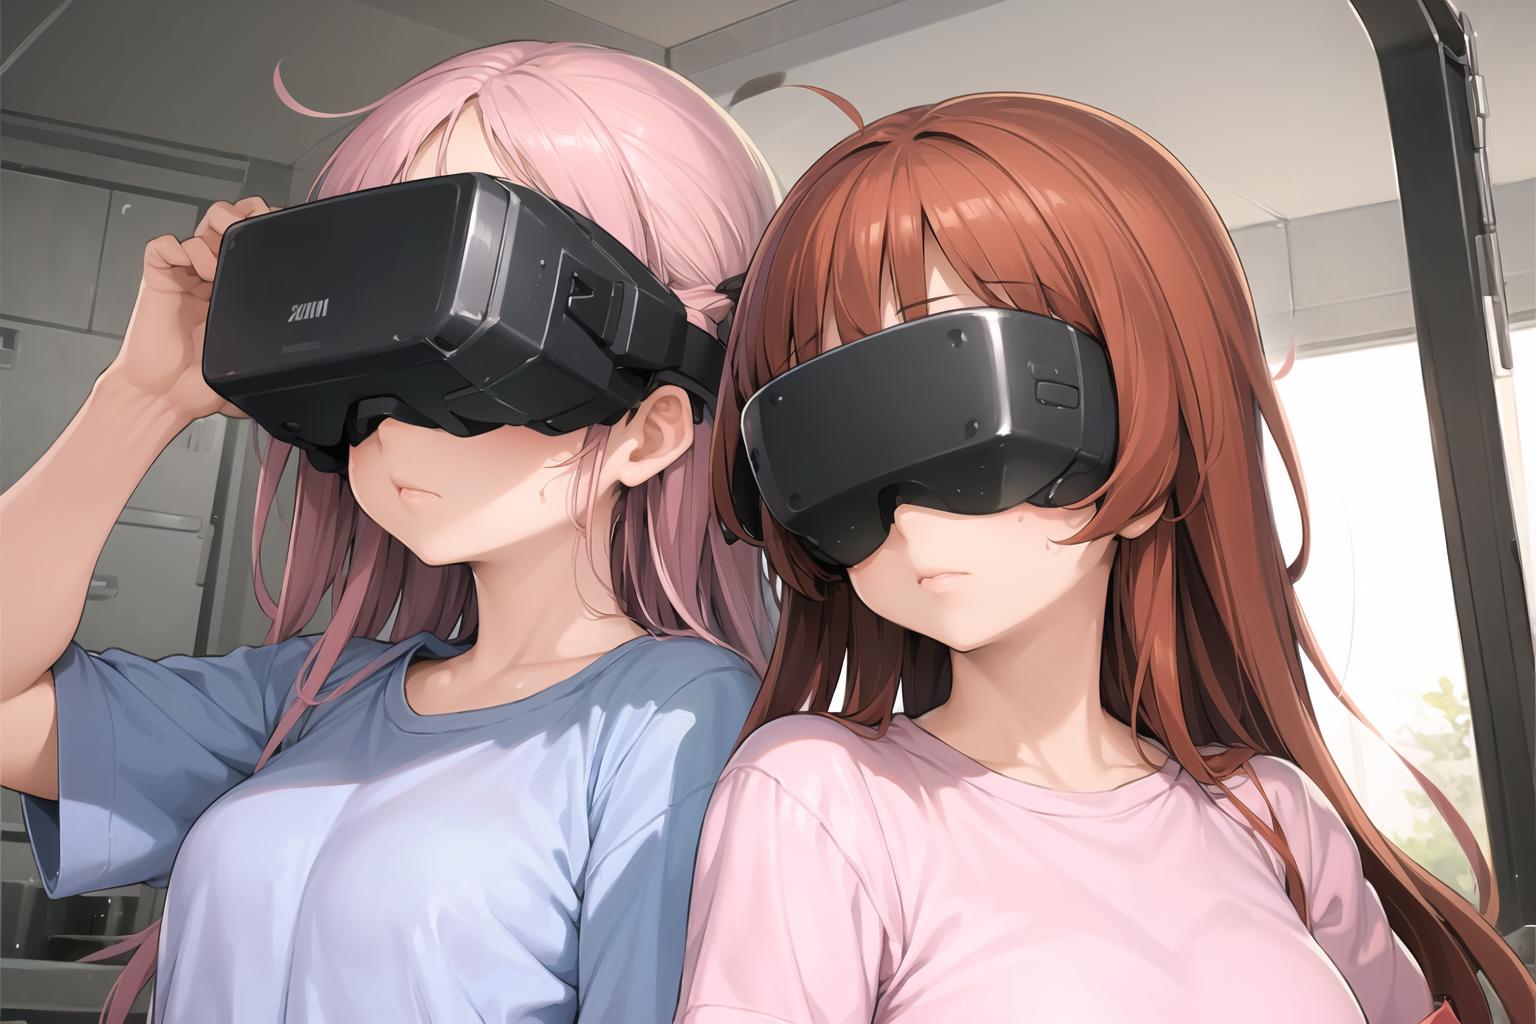 concept Head-mounted display image by FruityMelon